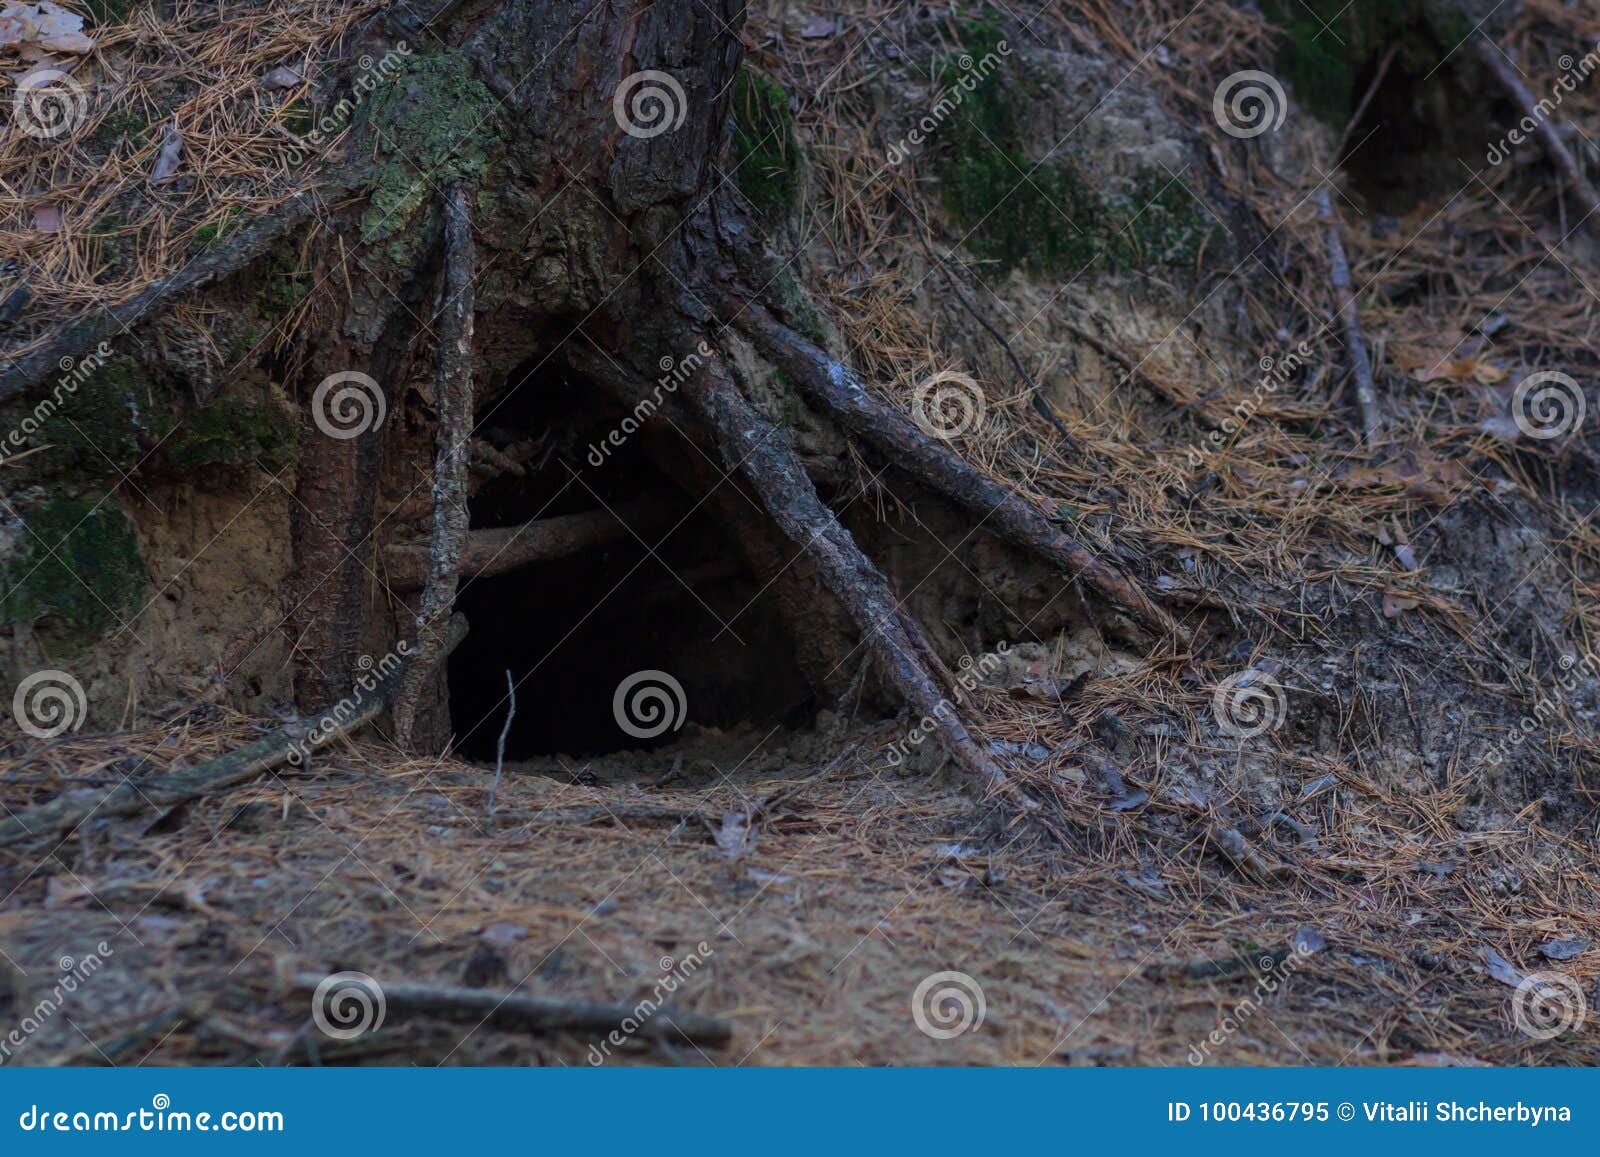 Animal home in tree hole stock image. Image of nature - 100436795